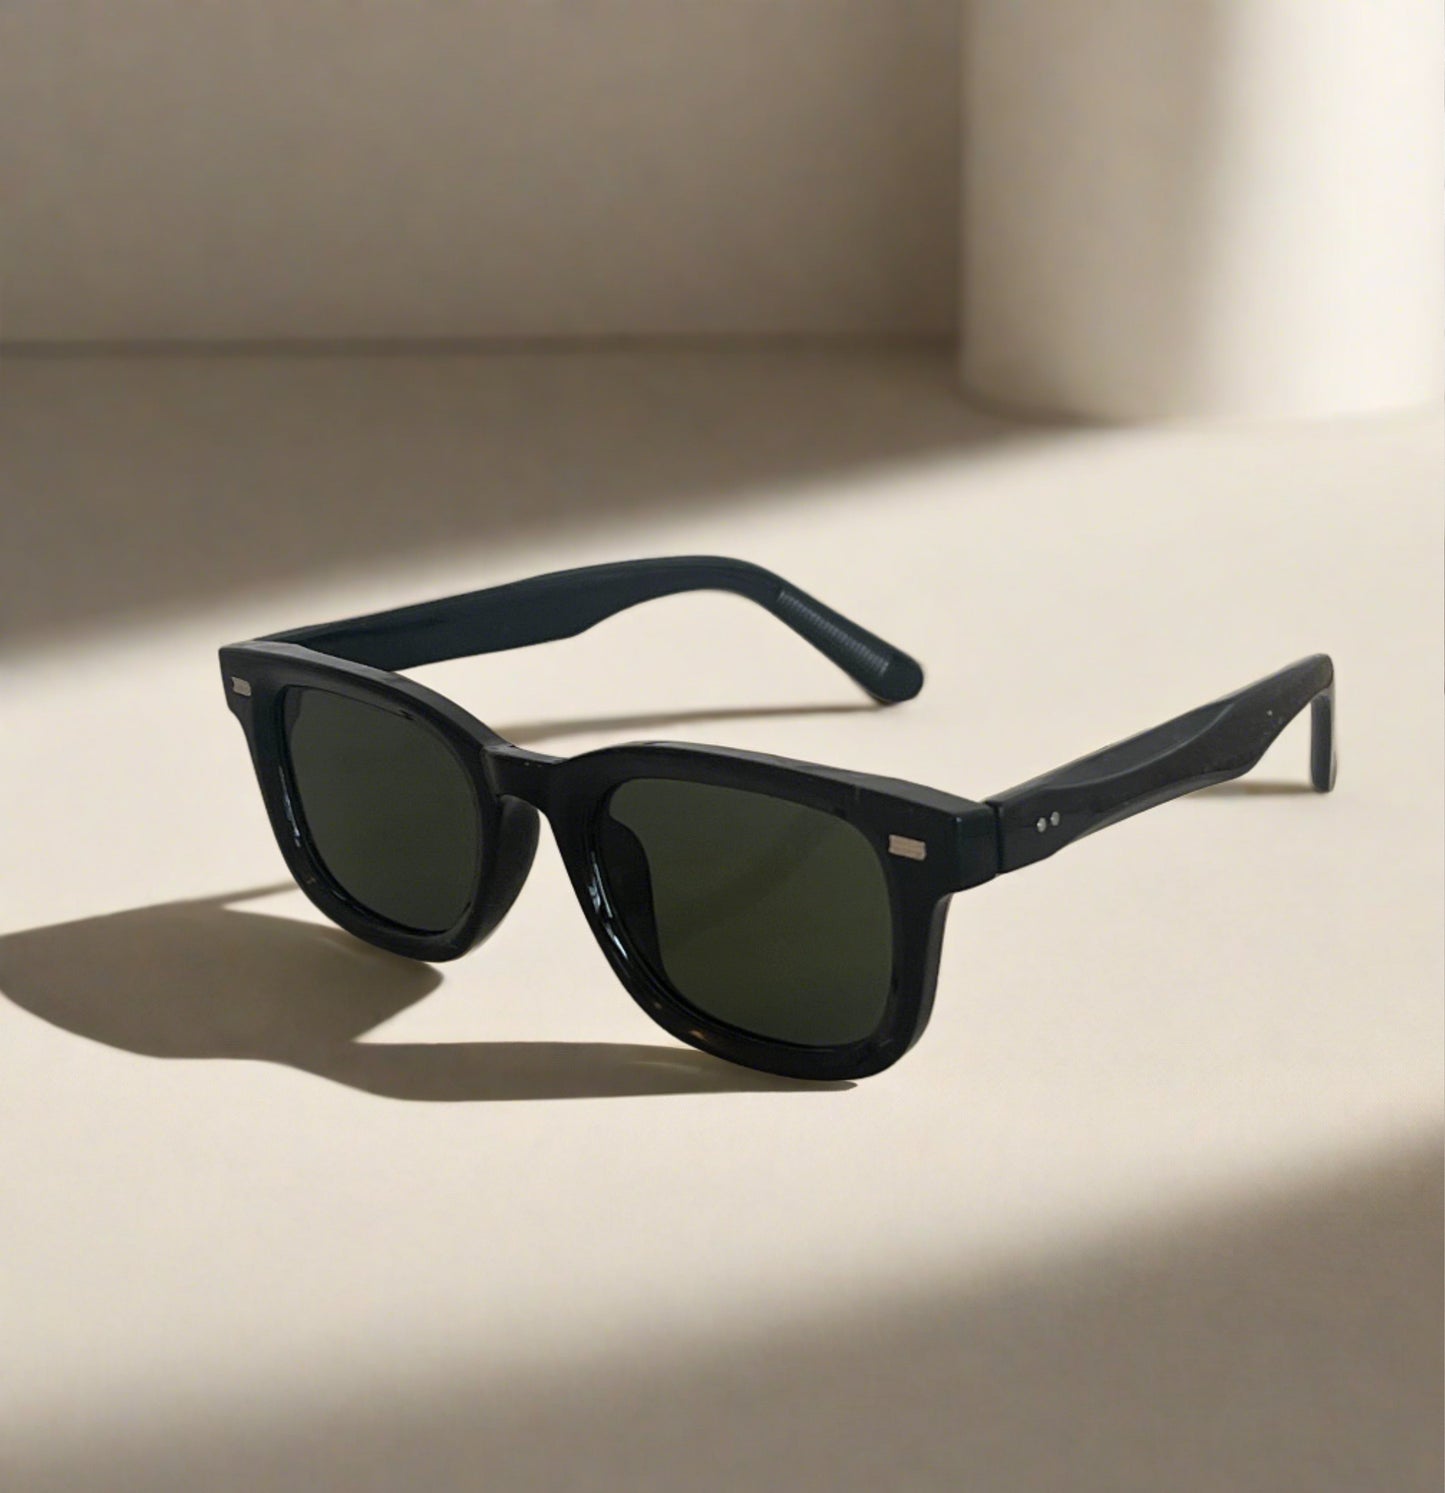 Icon sunglasses - Black with green lens